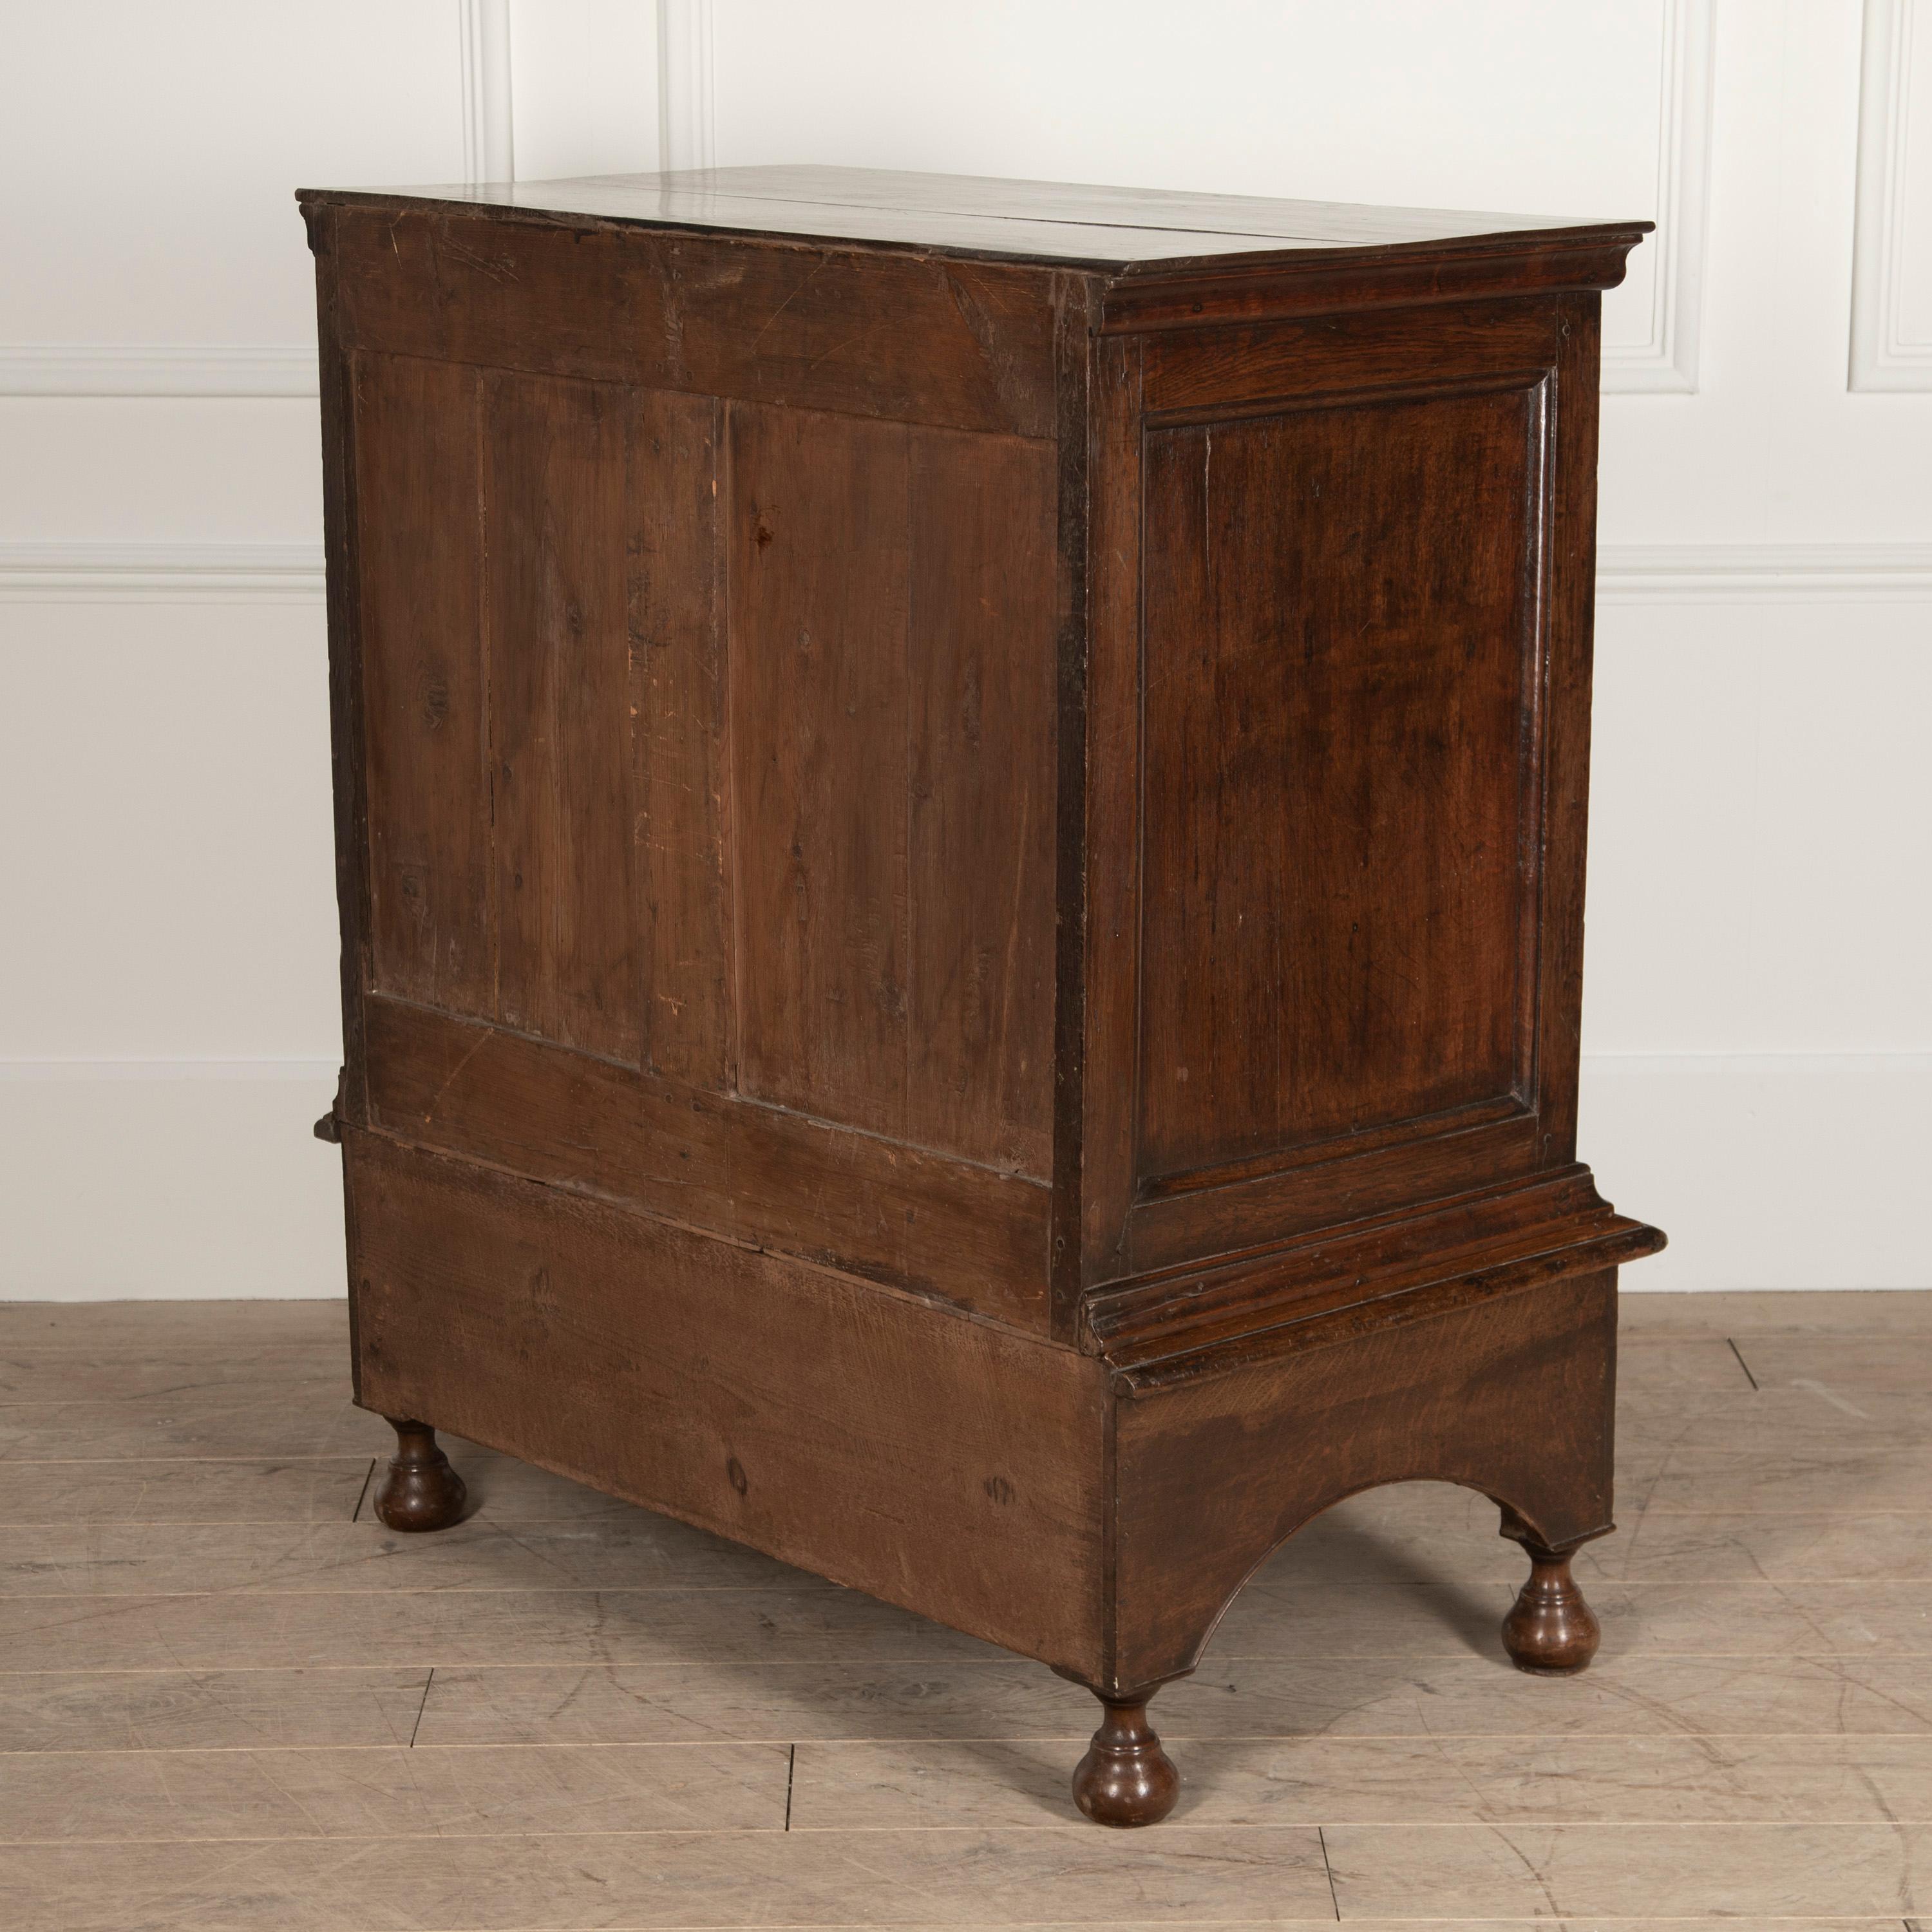 Late 18th Century English chest on stand. 

This fantastic country house piece was originally from a home in North Yorkshire. This chest-on stand offers plentiful storage. The top section offers five drawers which consist of two short and three